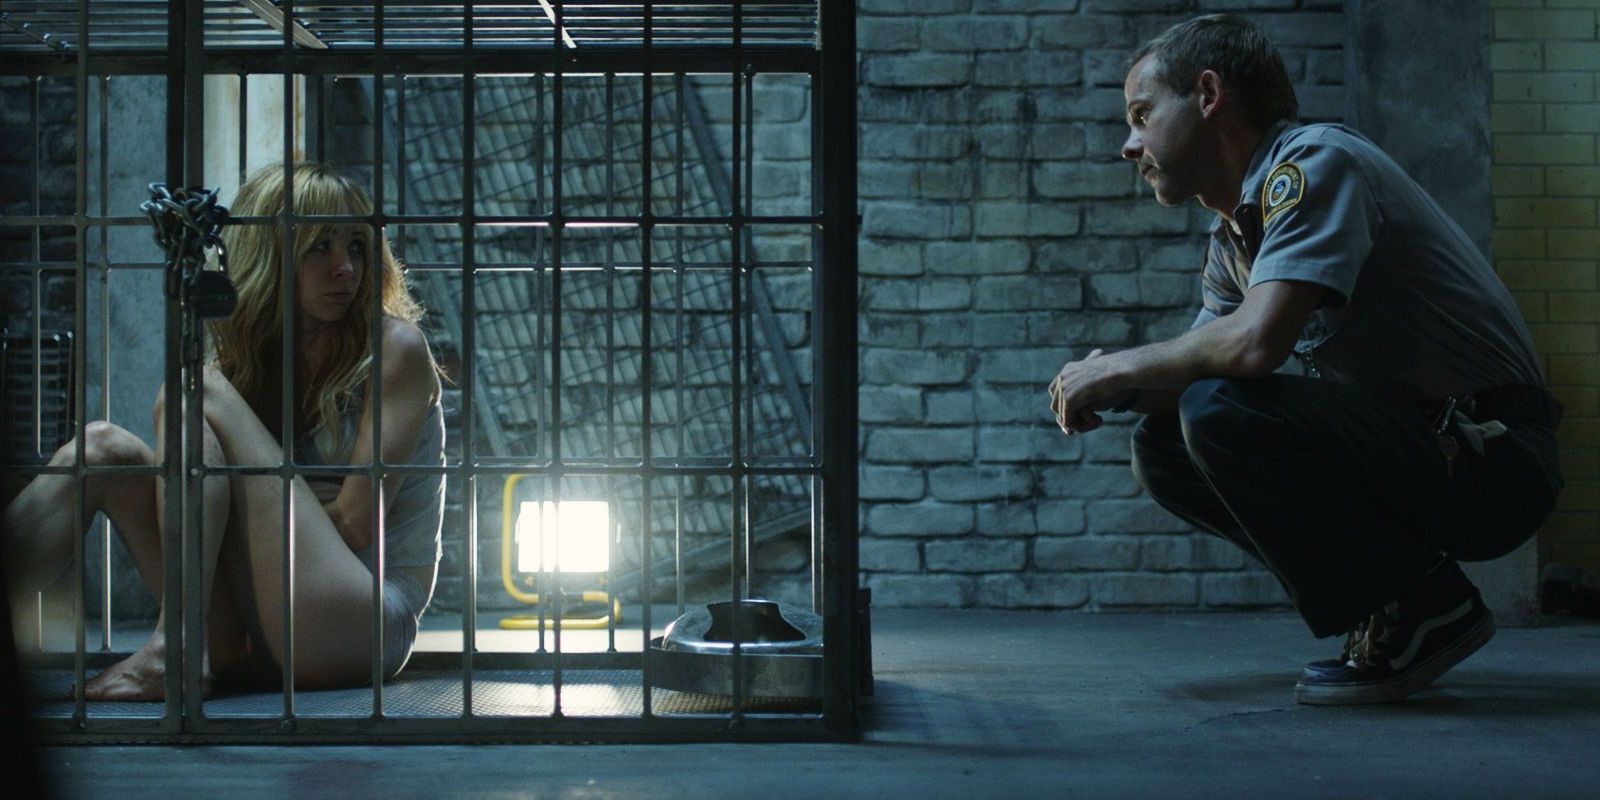 Pet - Dominic Monaghan with woman in cage